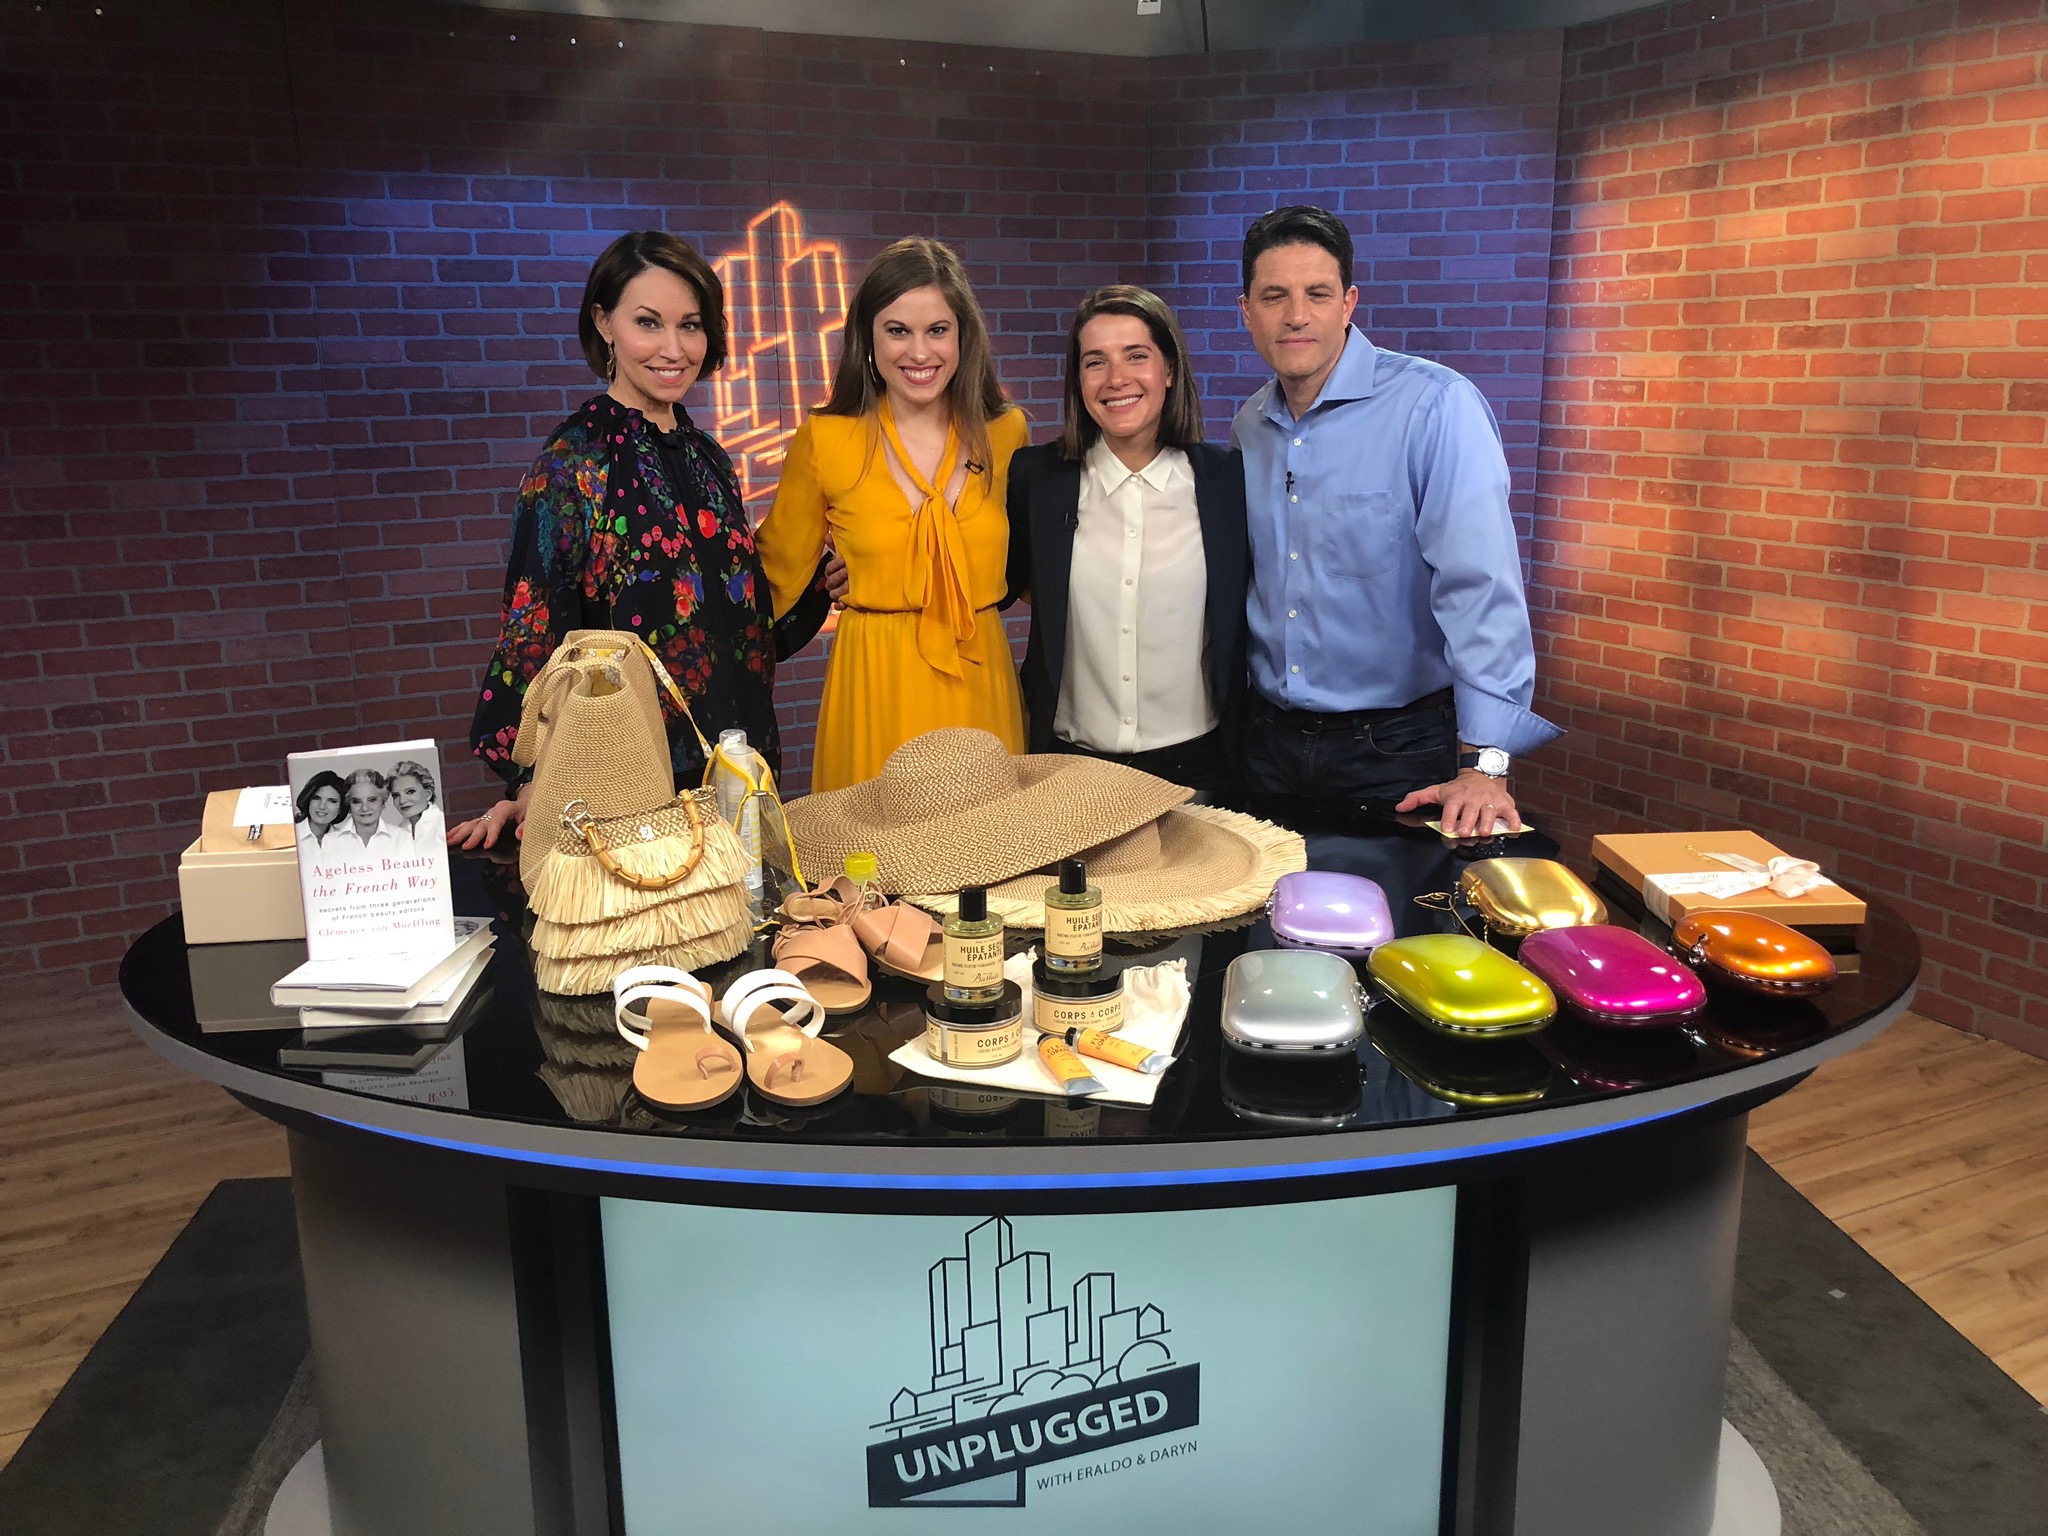 Four people standing on set of a tv station standing behind a counter filled with products: one woman wears a printed top, the other wears a yellow dress, one woman wears a black blazer with a white button down and the male wears a blue button down